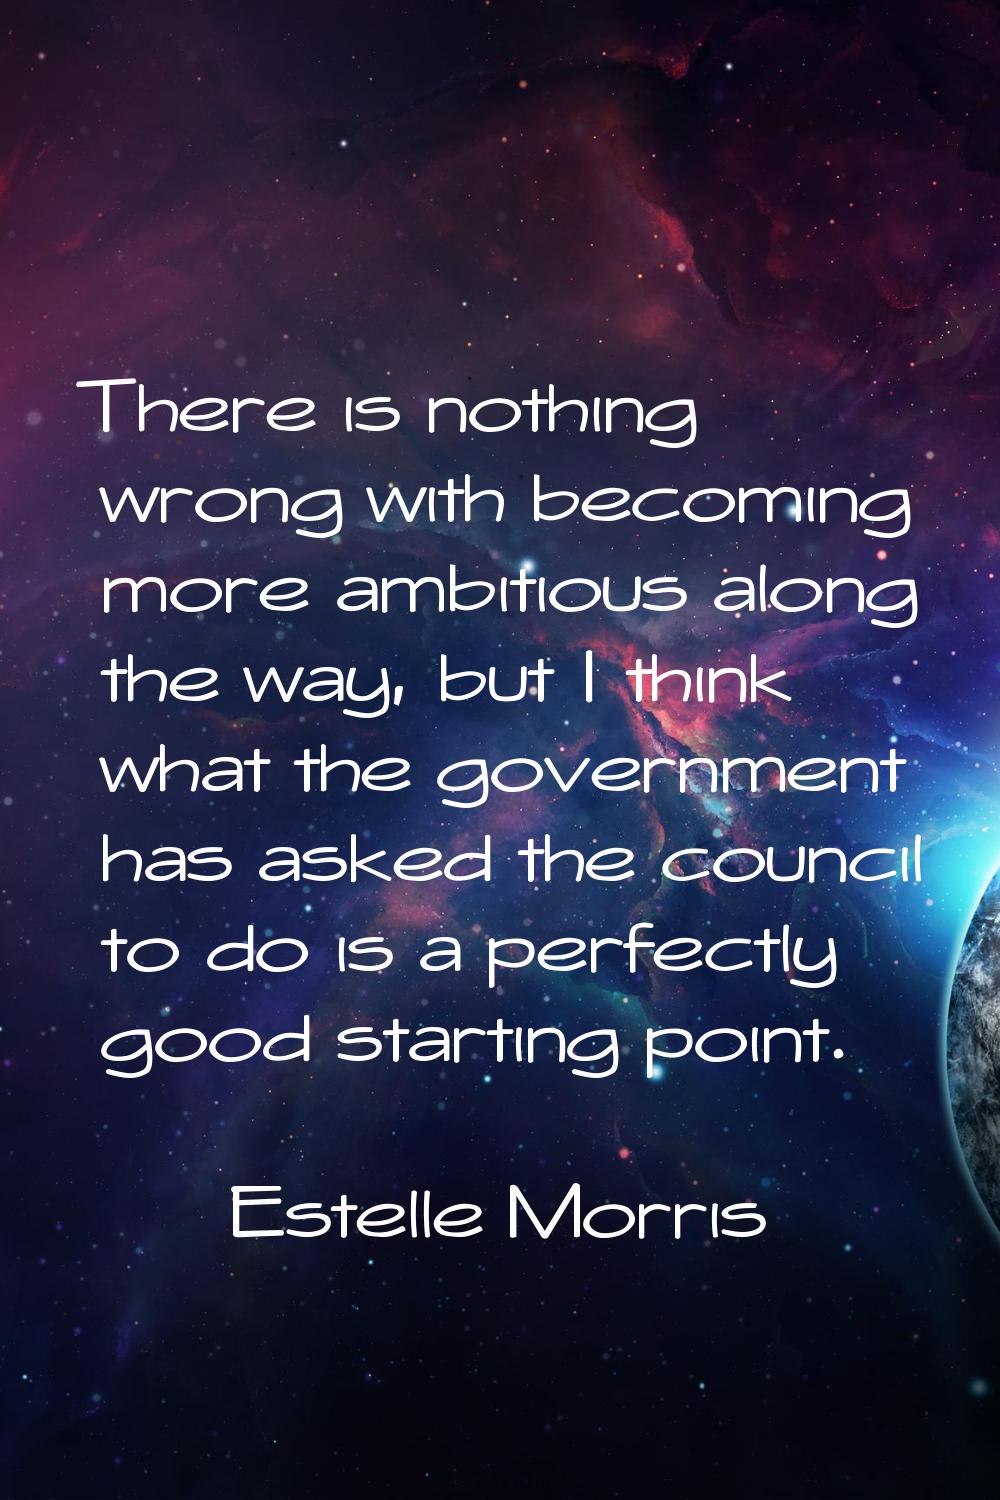 There is nothing wrong with becoming more ambitious along the way, but I think what the government 